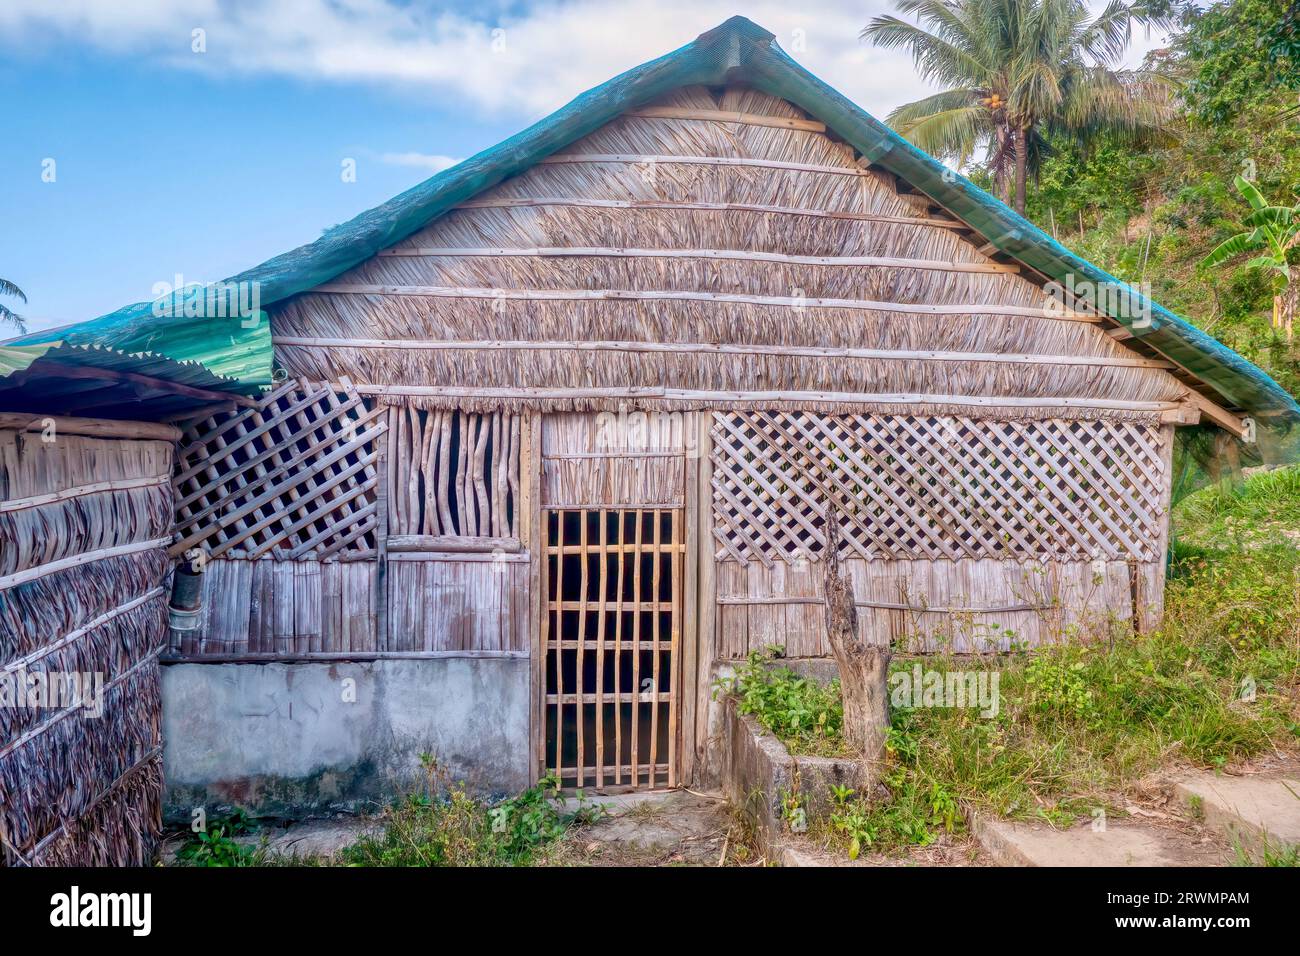 A traditional thatched house in the Philippines made almost entirely of native materials from bamboo and palm trees. Stock Photo